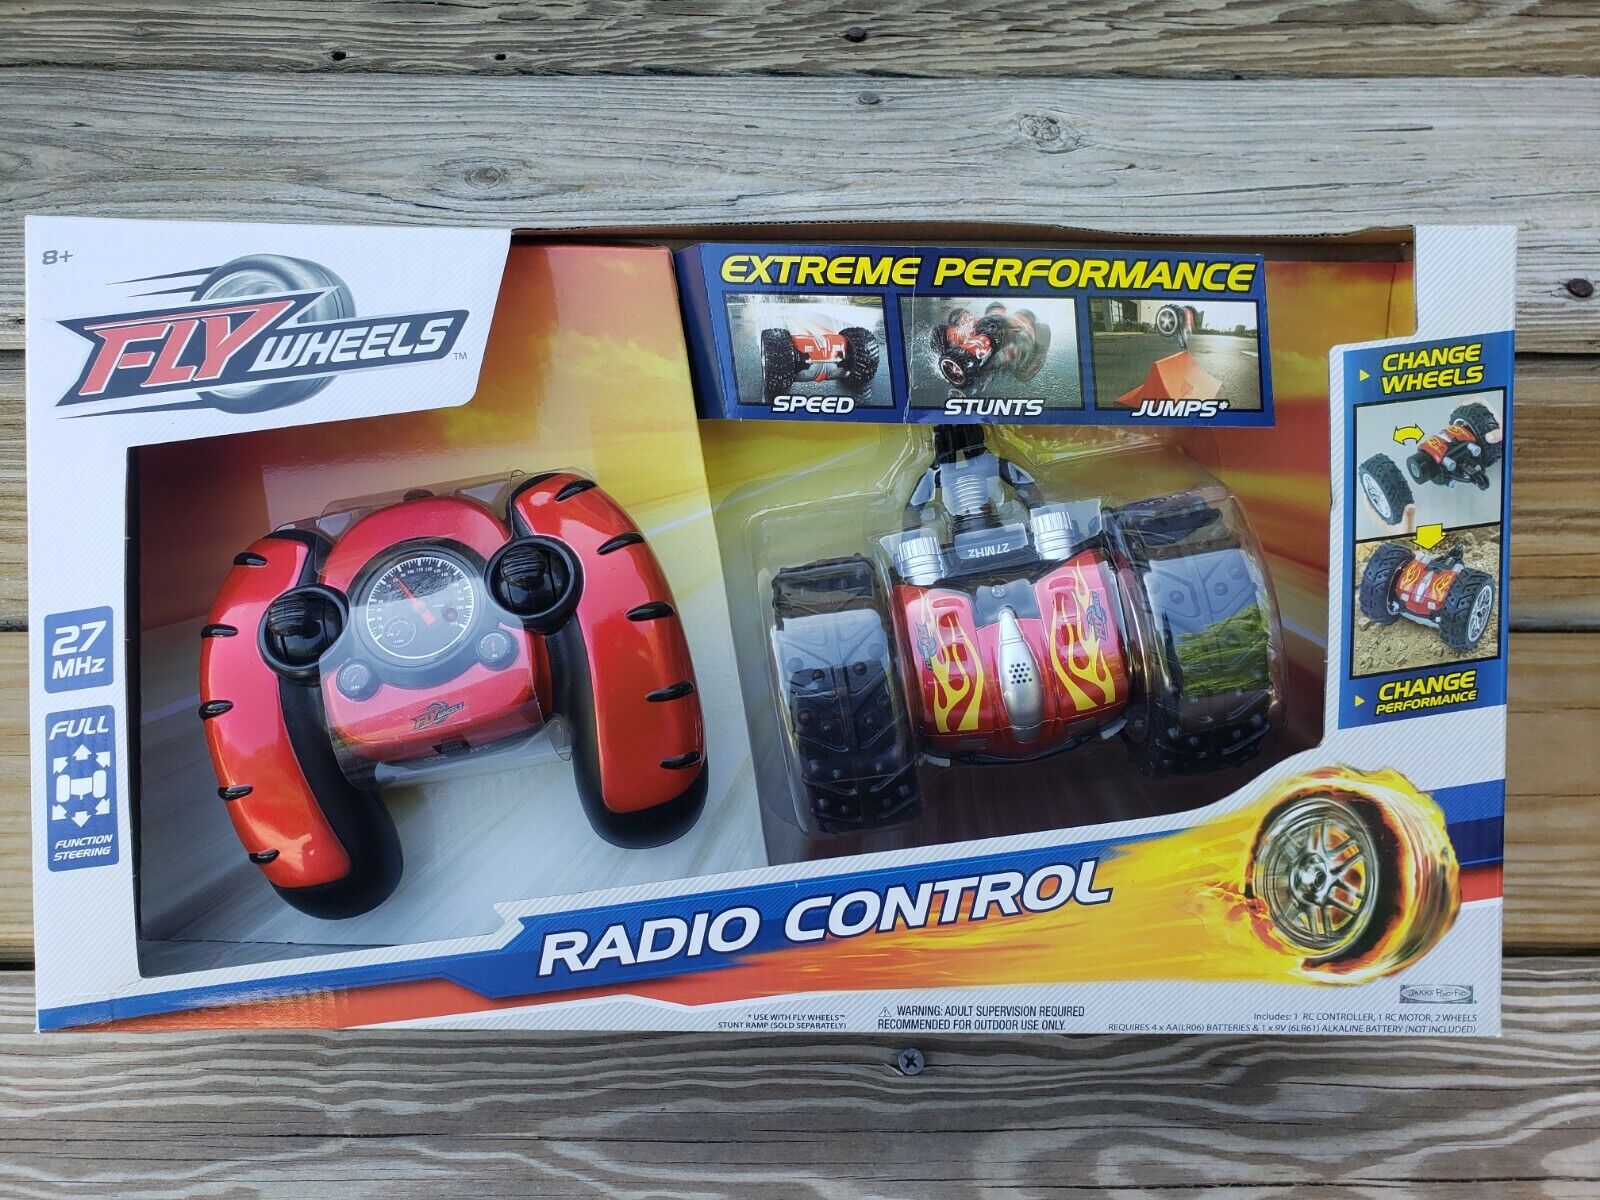 Fly Wheels Radio Control Vehicle~ 27MHZ Extreme Performance~Kids Remote Car Toy 